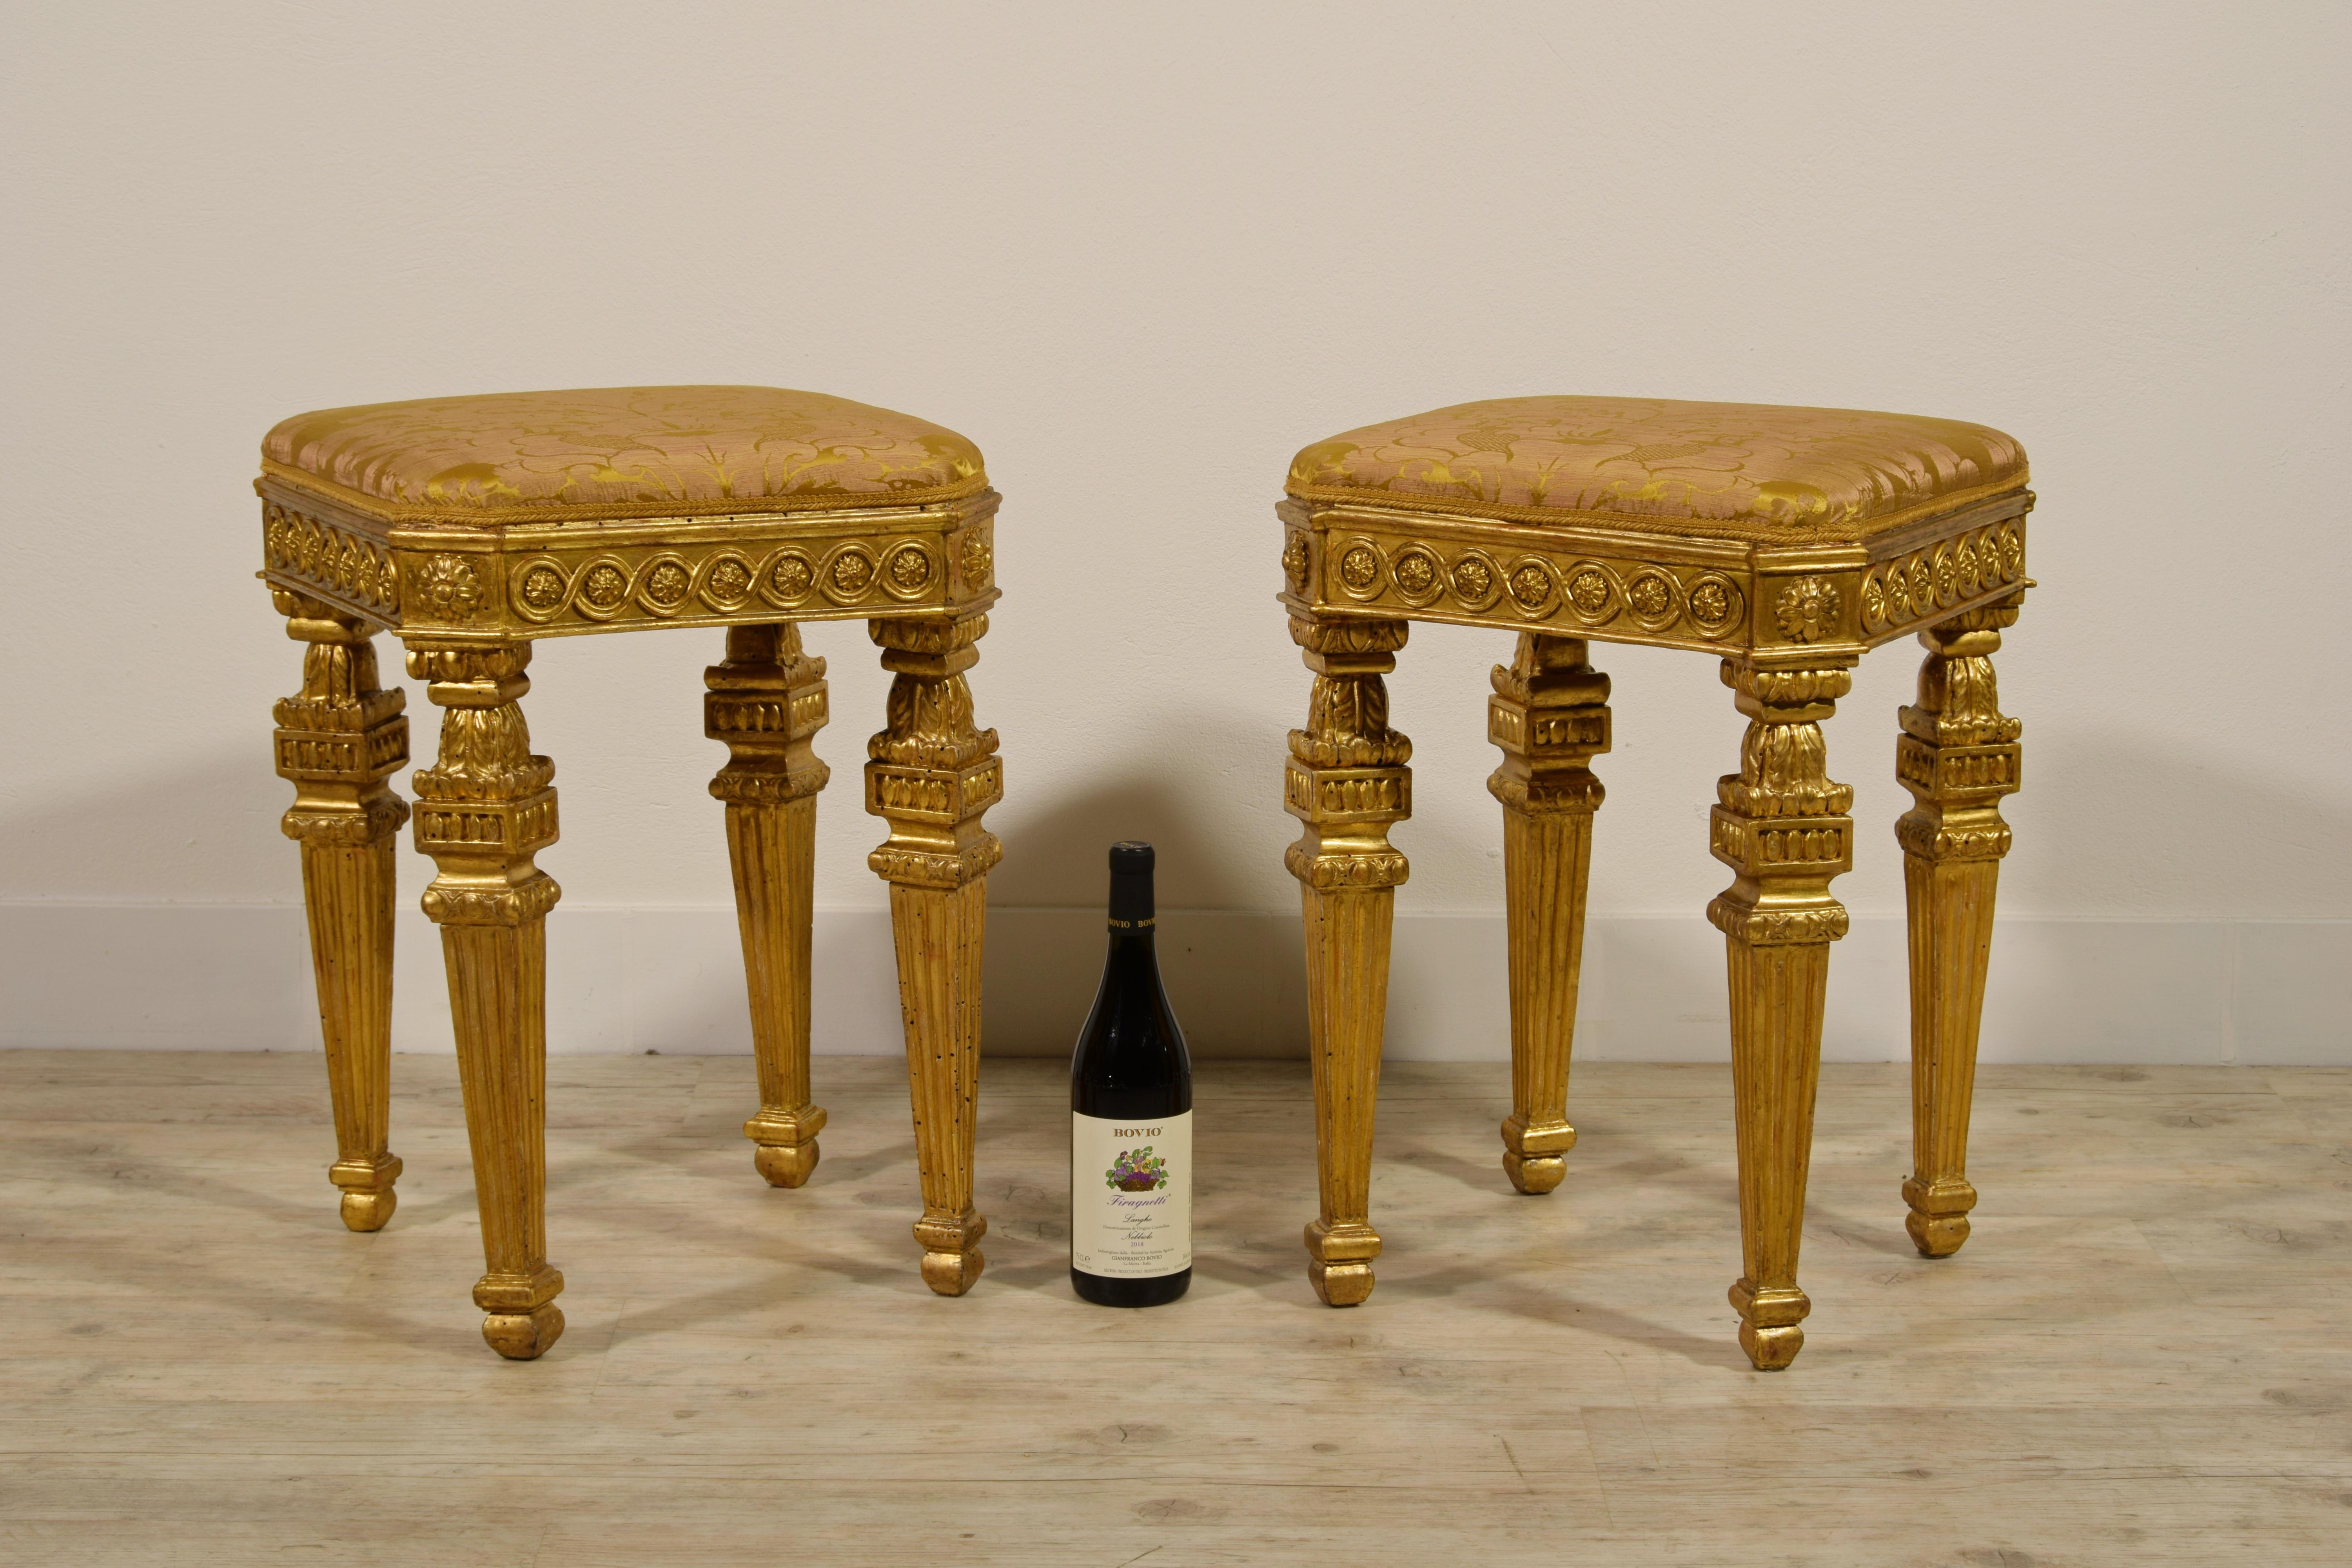 Hand-Carved 18th Century Pair of Italian Neoclassical Giltwood Stools